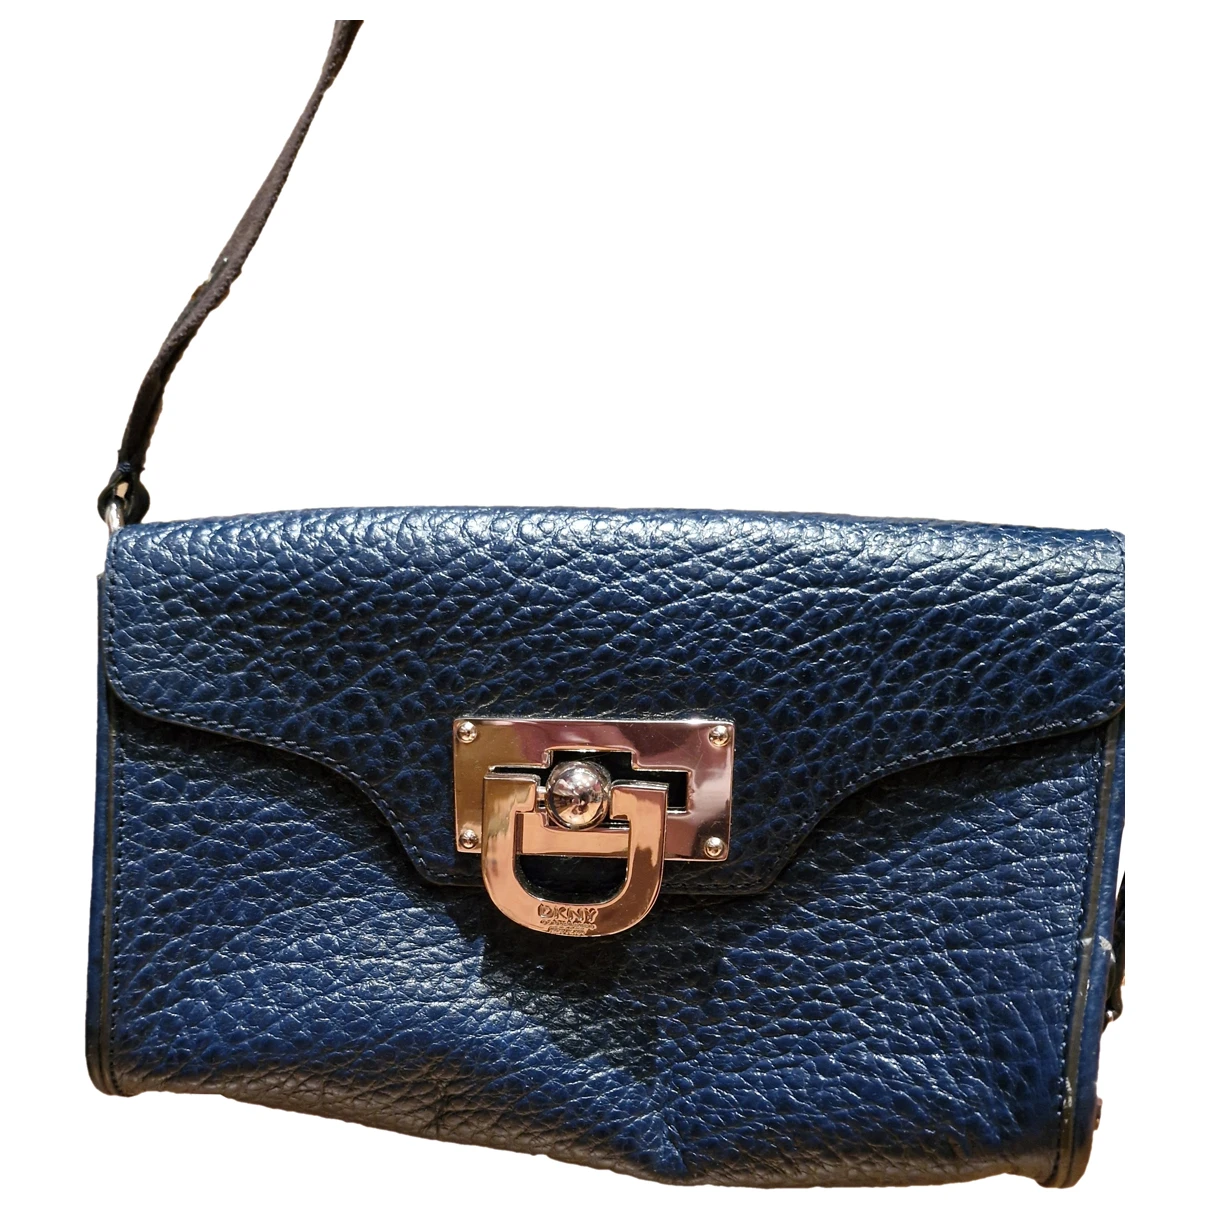 Pre-owned Dkny Leather Handbag In Blue